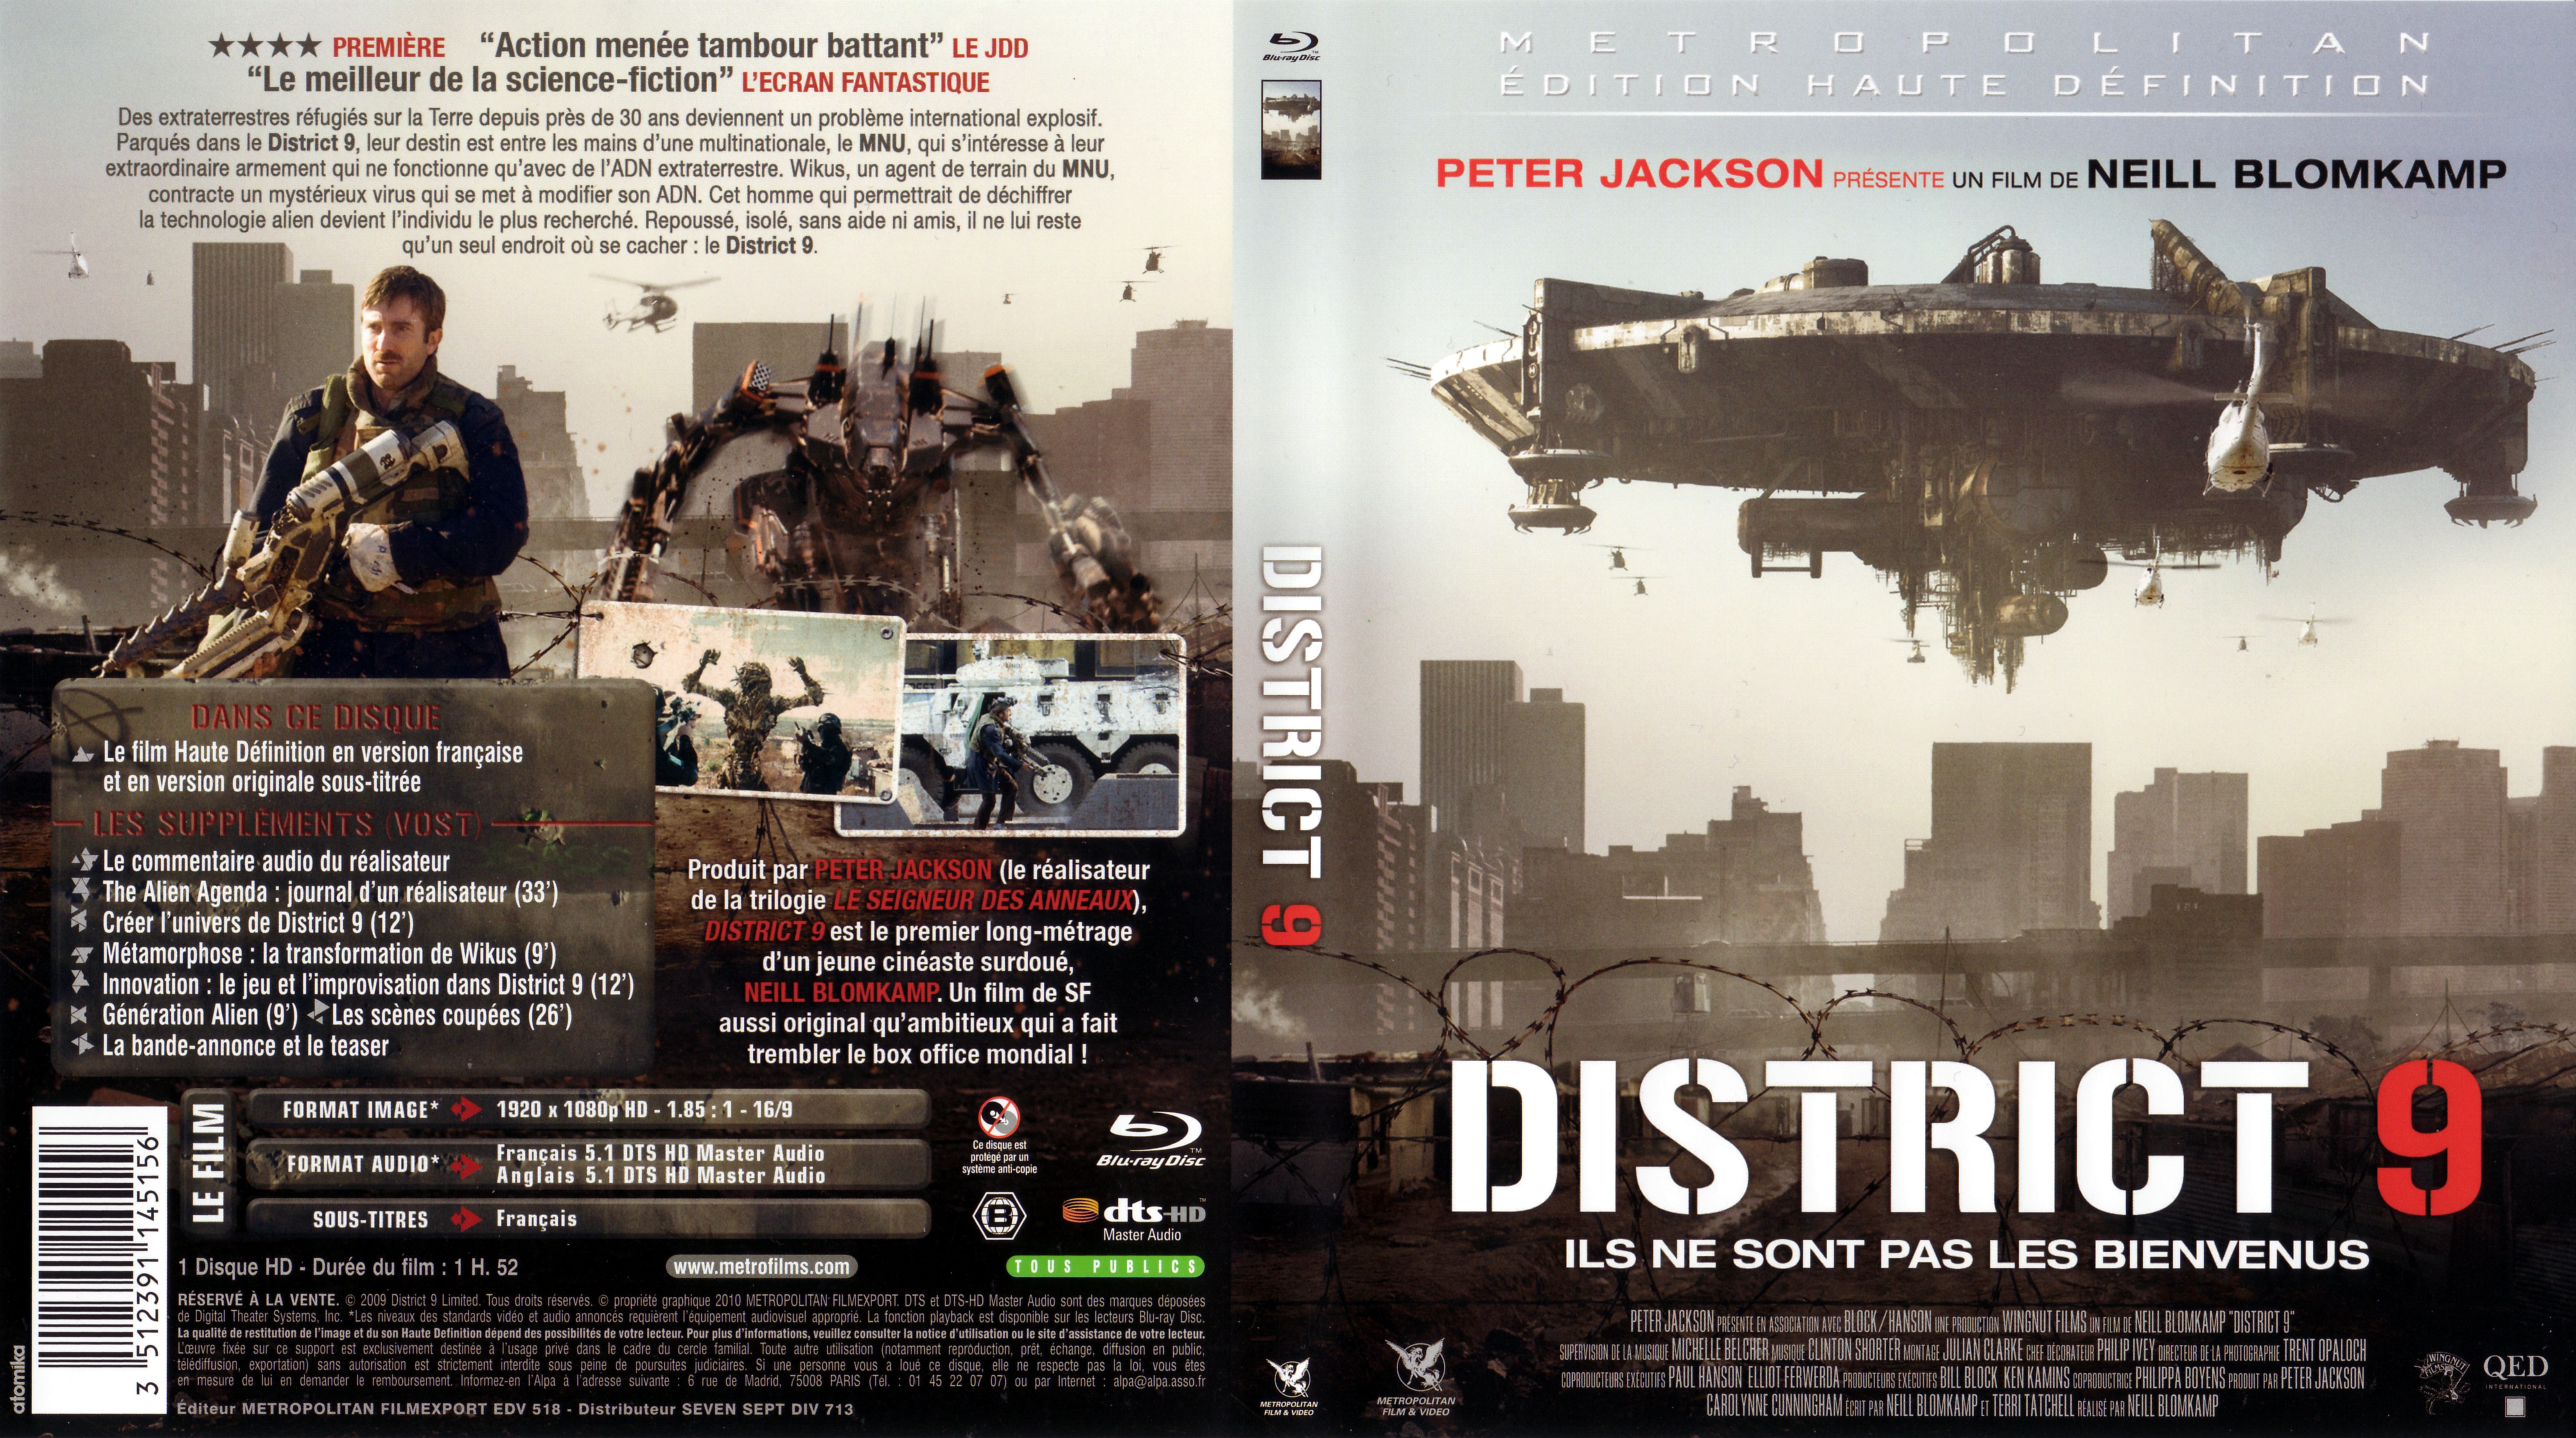 Jaquette DVD District 9 (BLU-RAY) v2